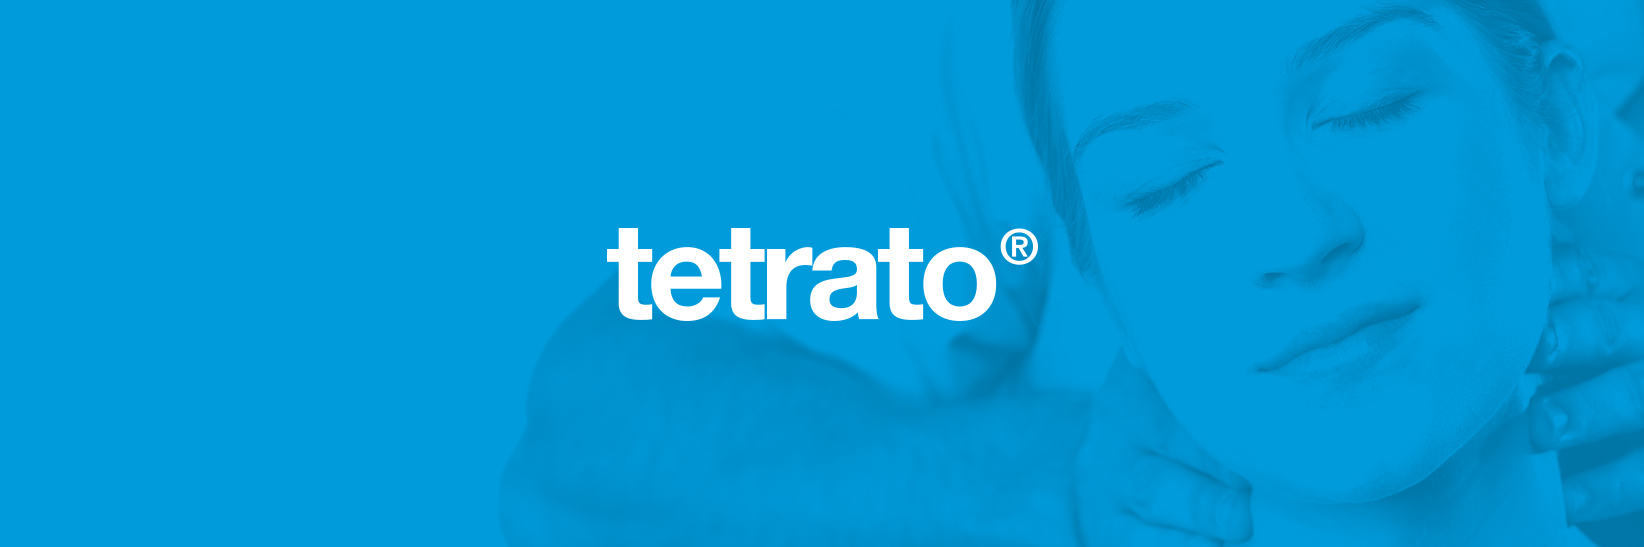 Tetrato by Chillypills - Creative Work